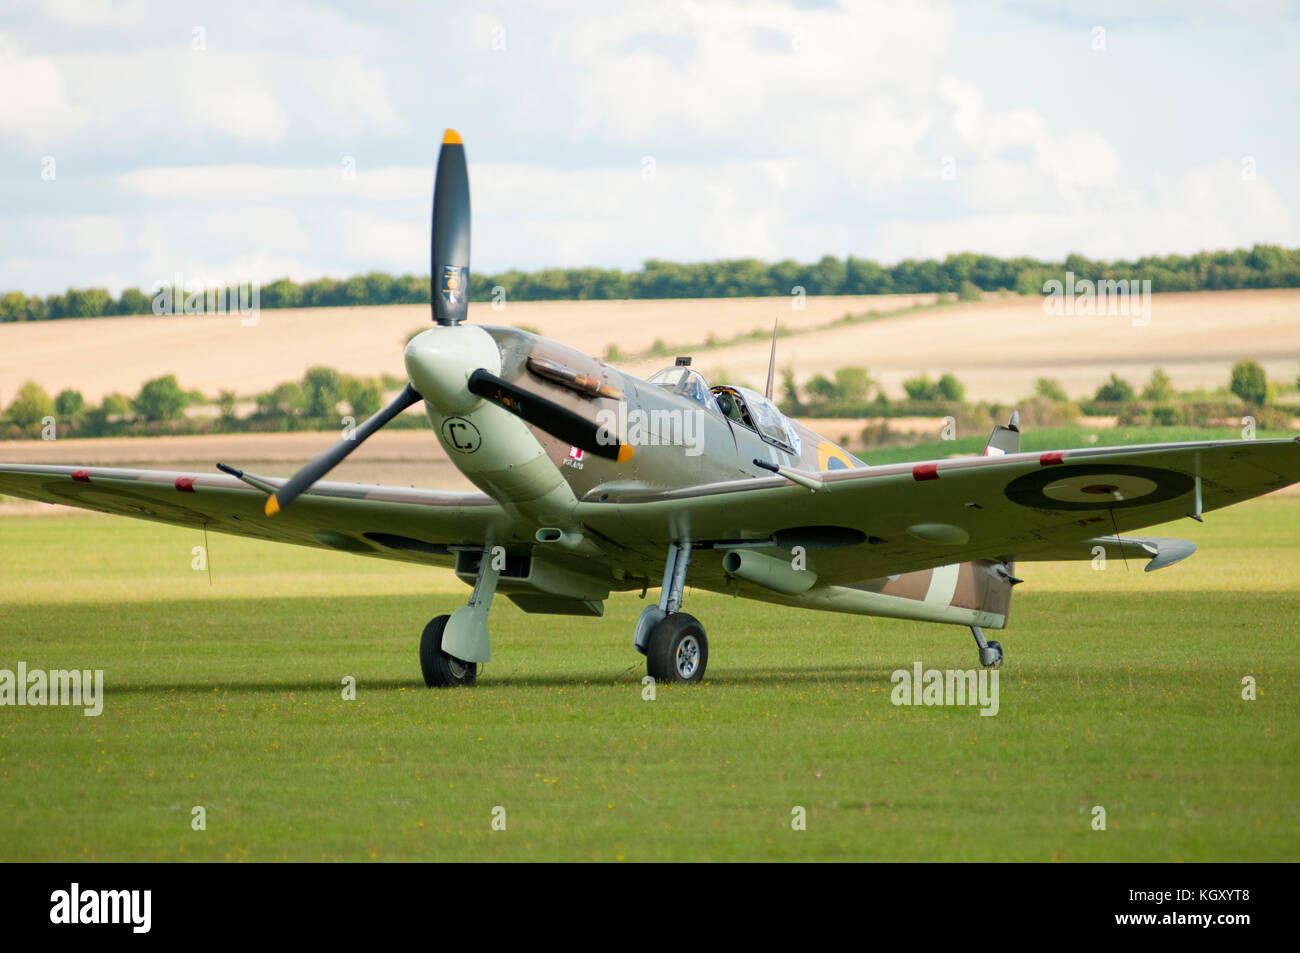 A Spitfire aircraft shown parked on an airfield in Cambridgeshire. Stock Photo